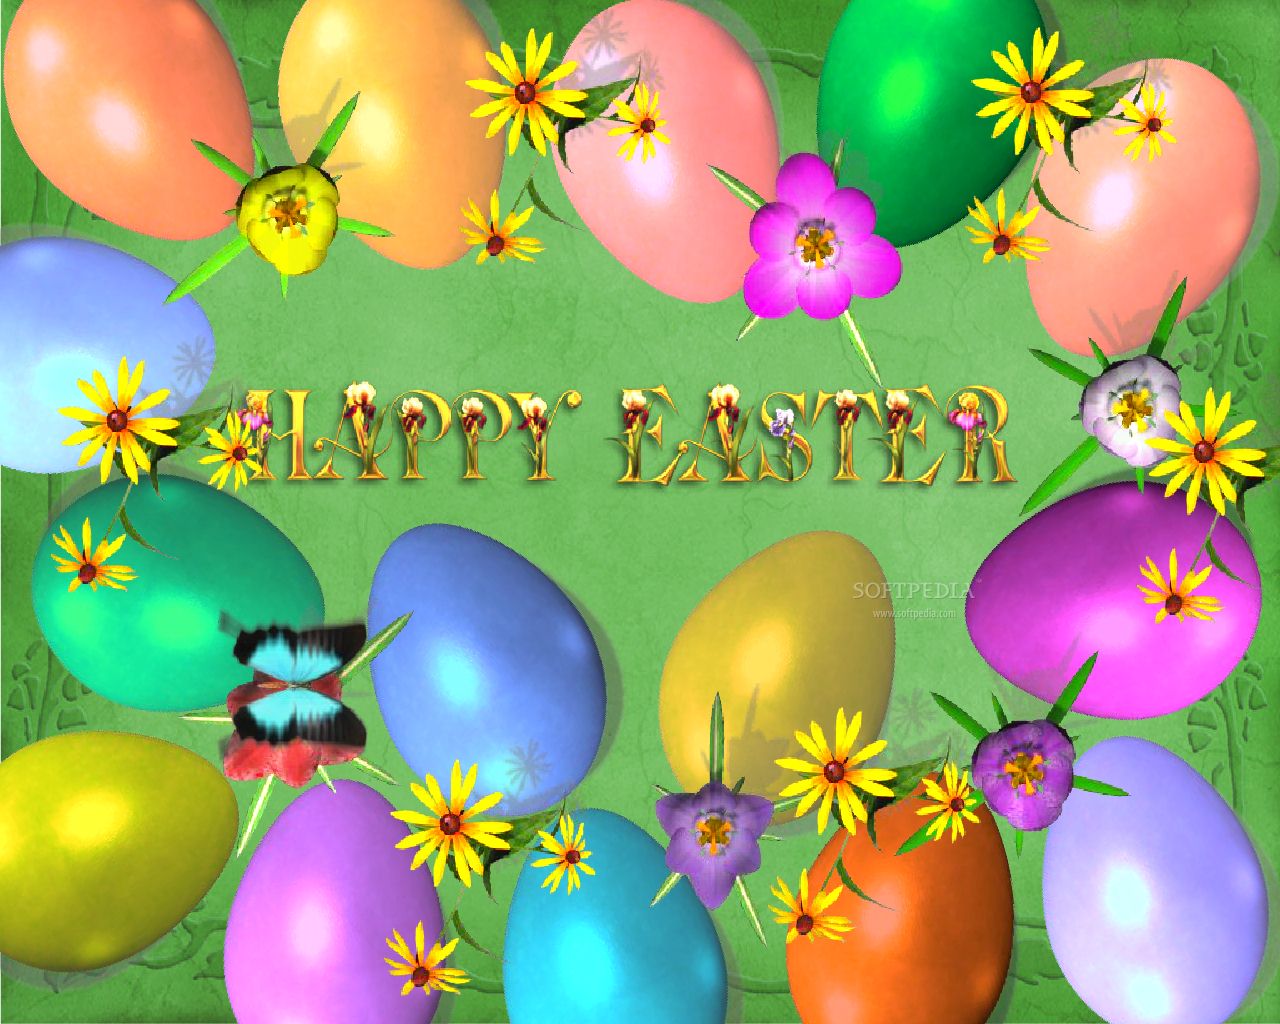 Image Gallary Beautiful Happy Easter Wallpaper For